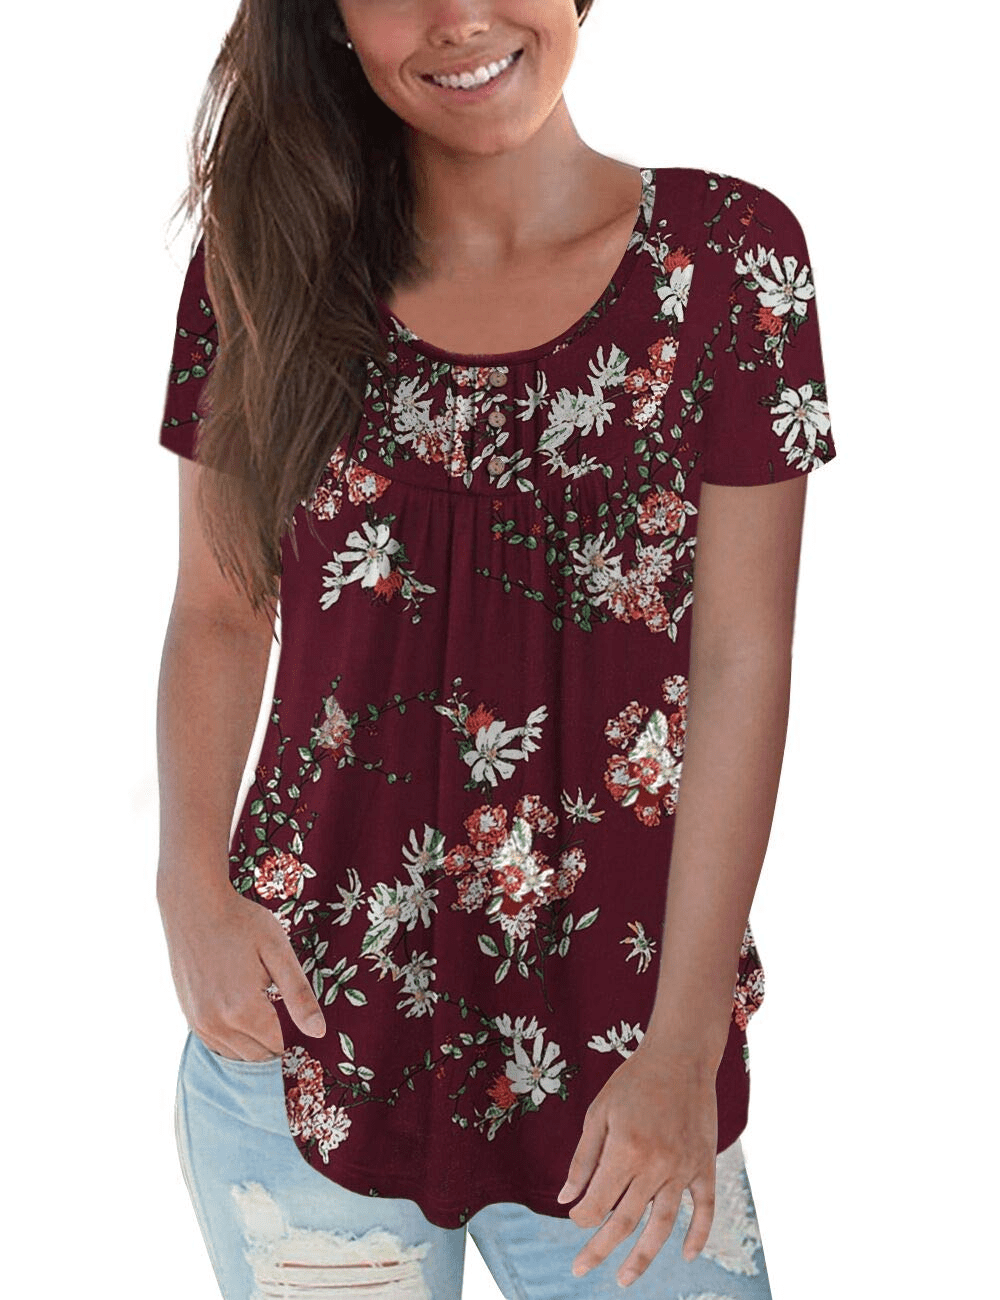 a.Jesdani Women's Plus Size Tunic Tops Casual Floral Short Sleeve ...